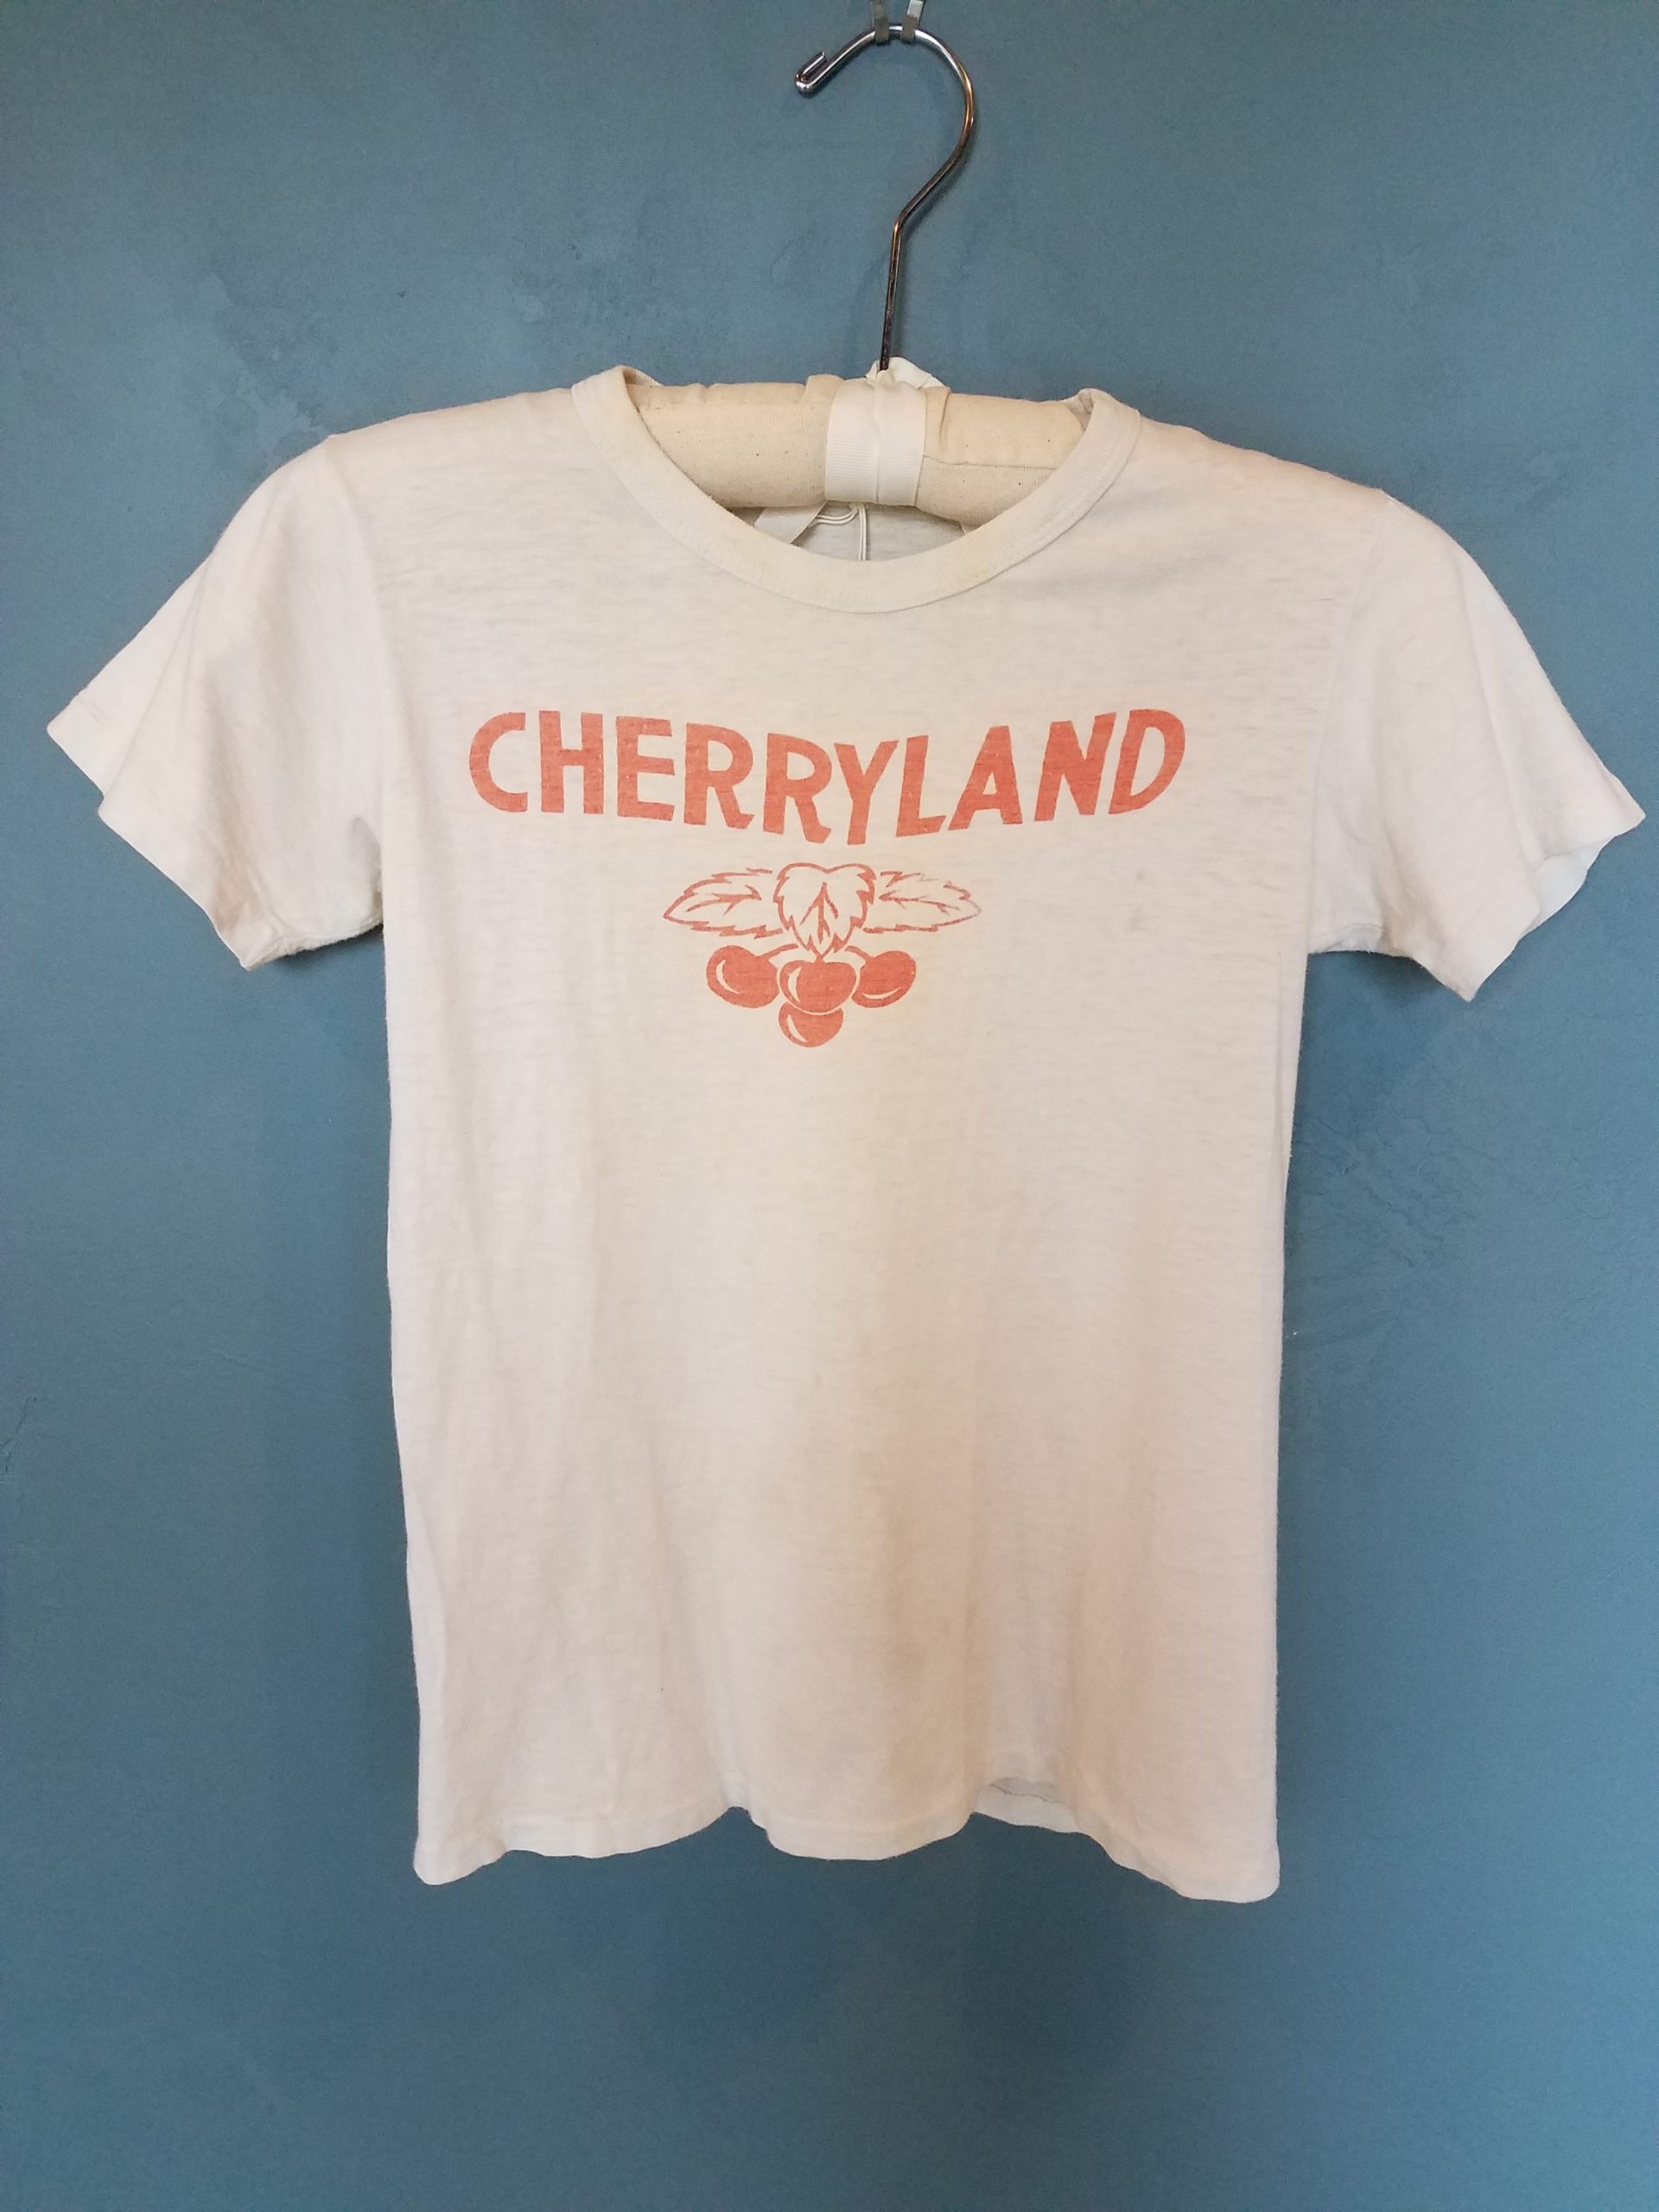 Read more about the article OBJECT HISTORY: Cherryland T-Shirt